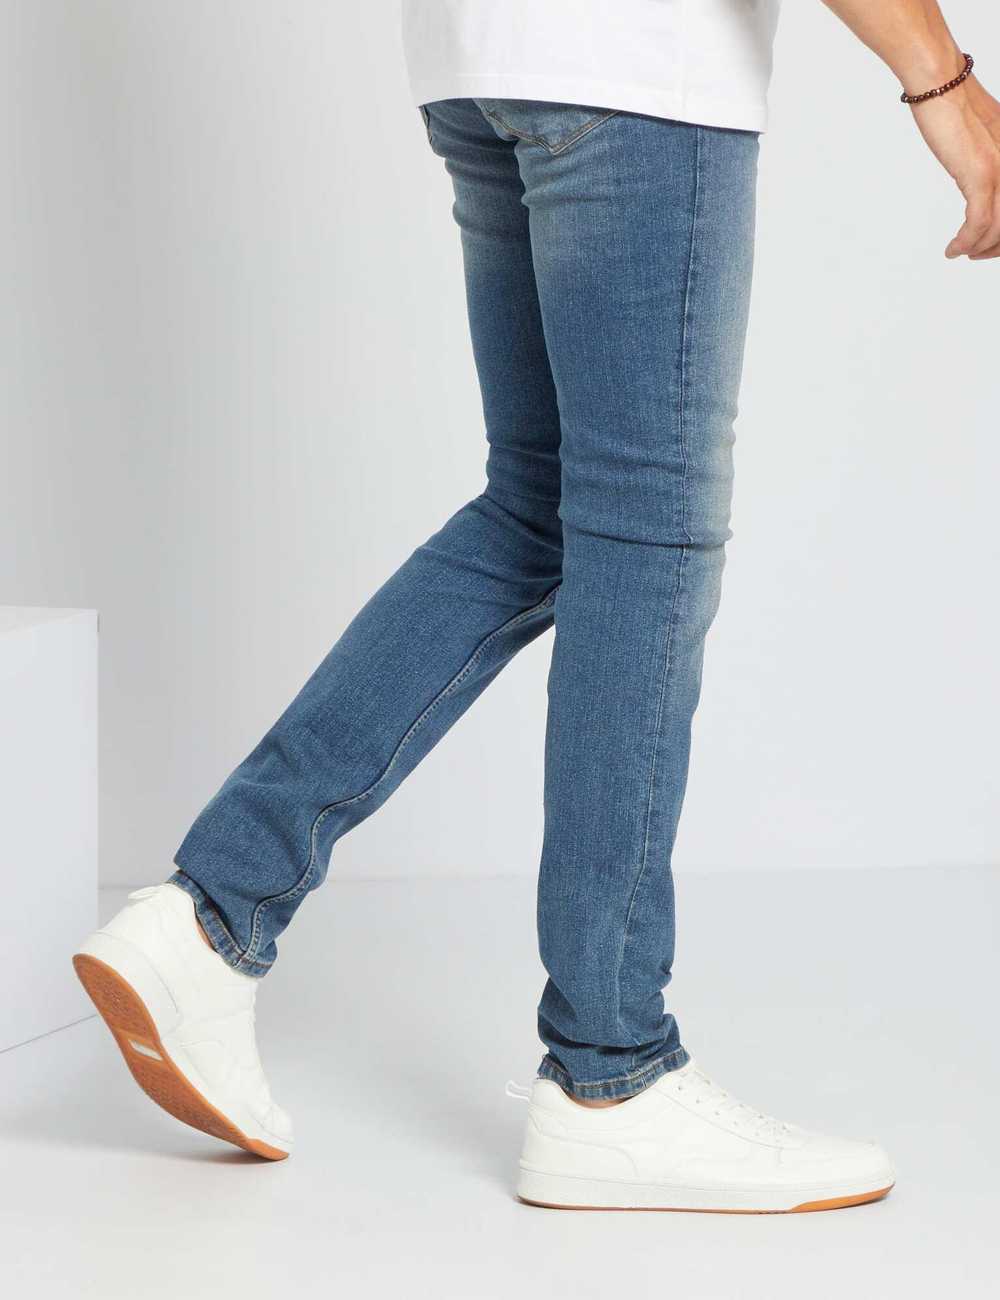 ASOS DESIGN boyfriend jeans in mid wash with lace hem, ASOS